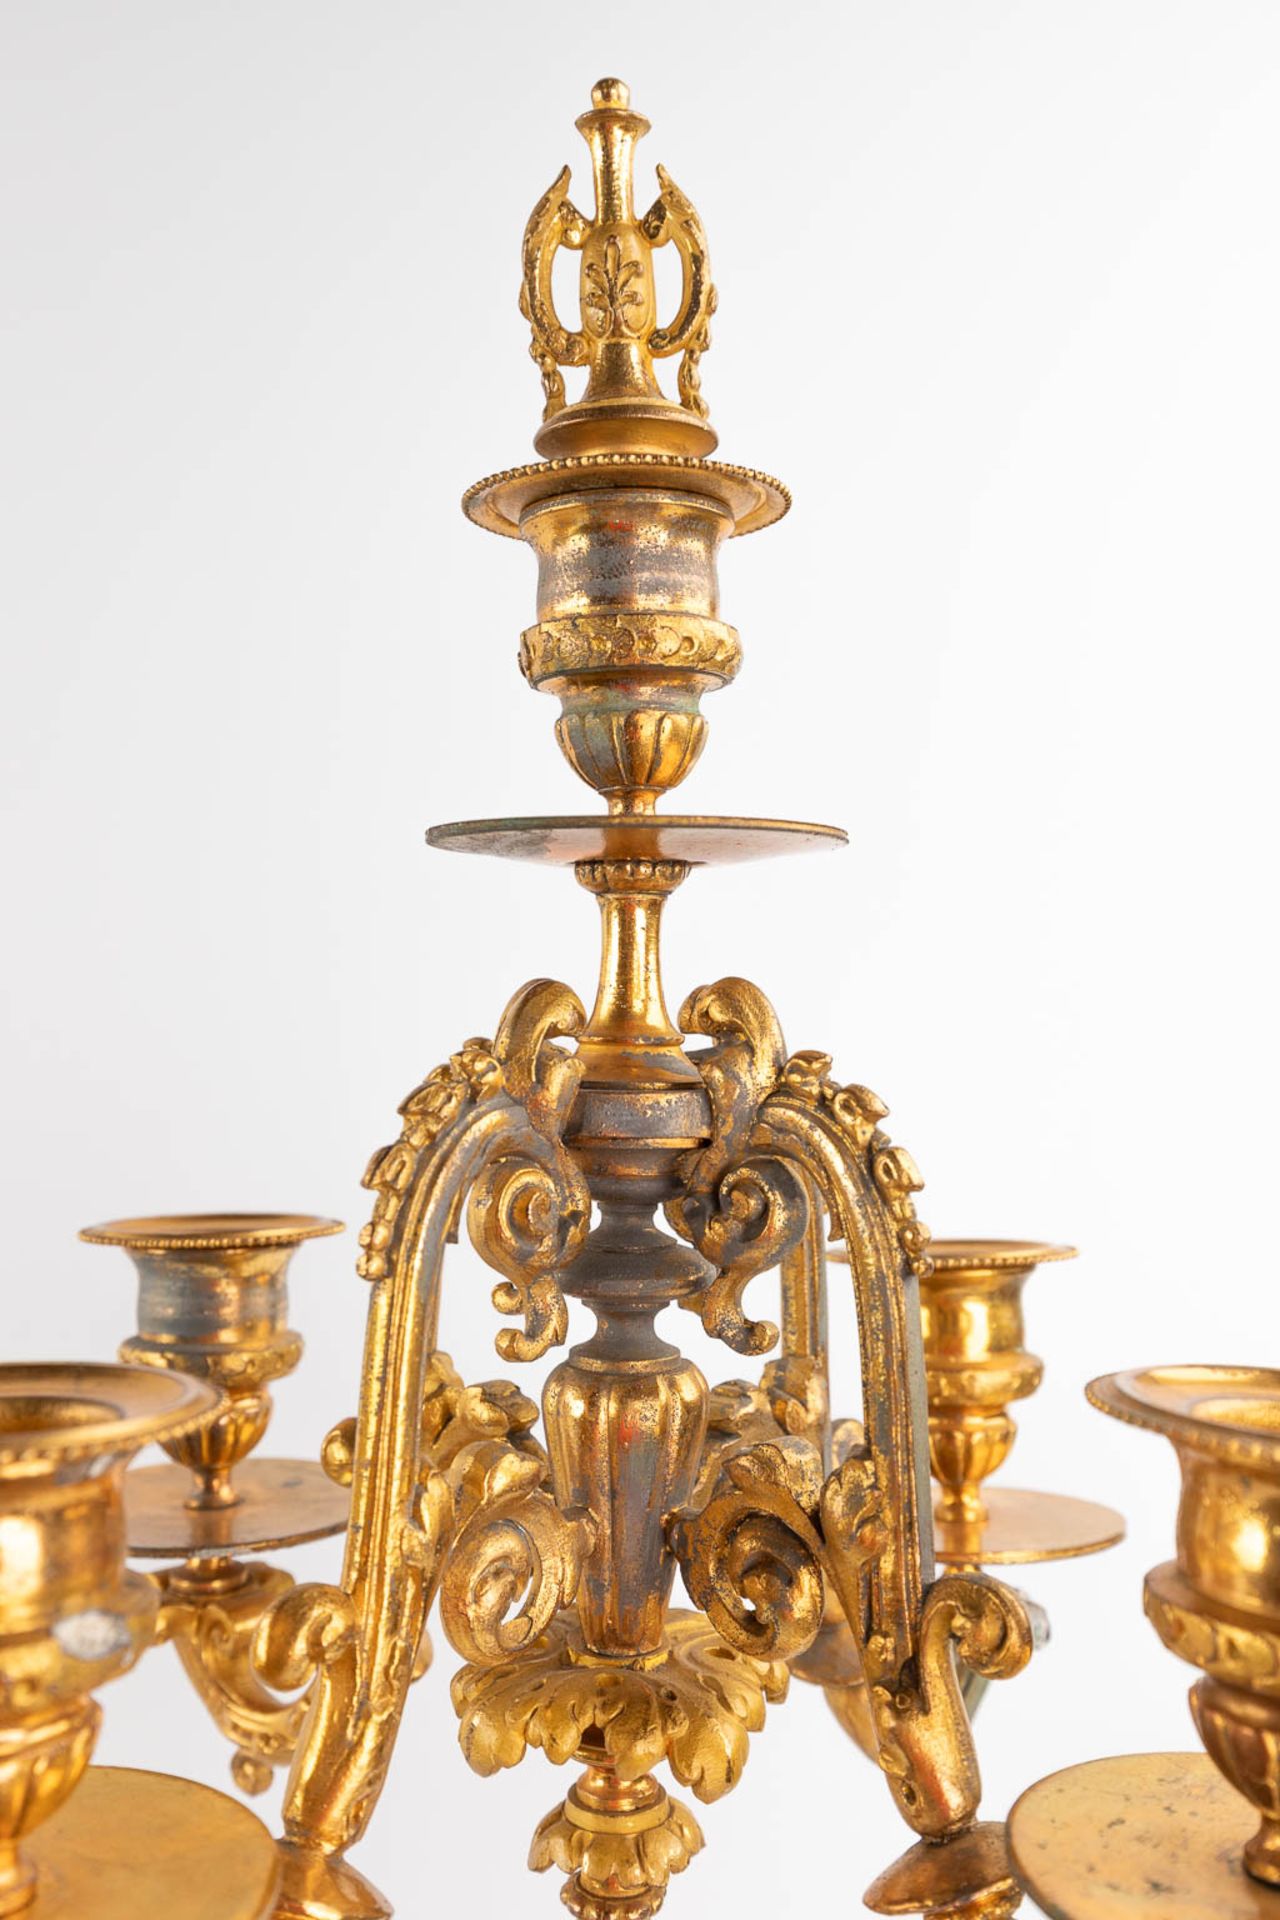 A three-piece mantle garniture clock and candelabra, gilt spelter, decorated with putti. Circa 1900. - Image 9 of 19